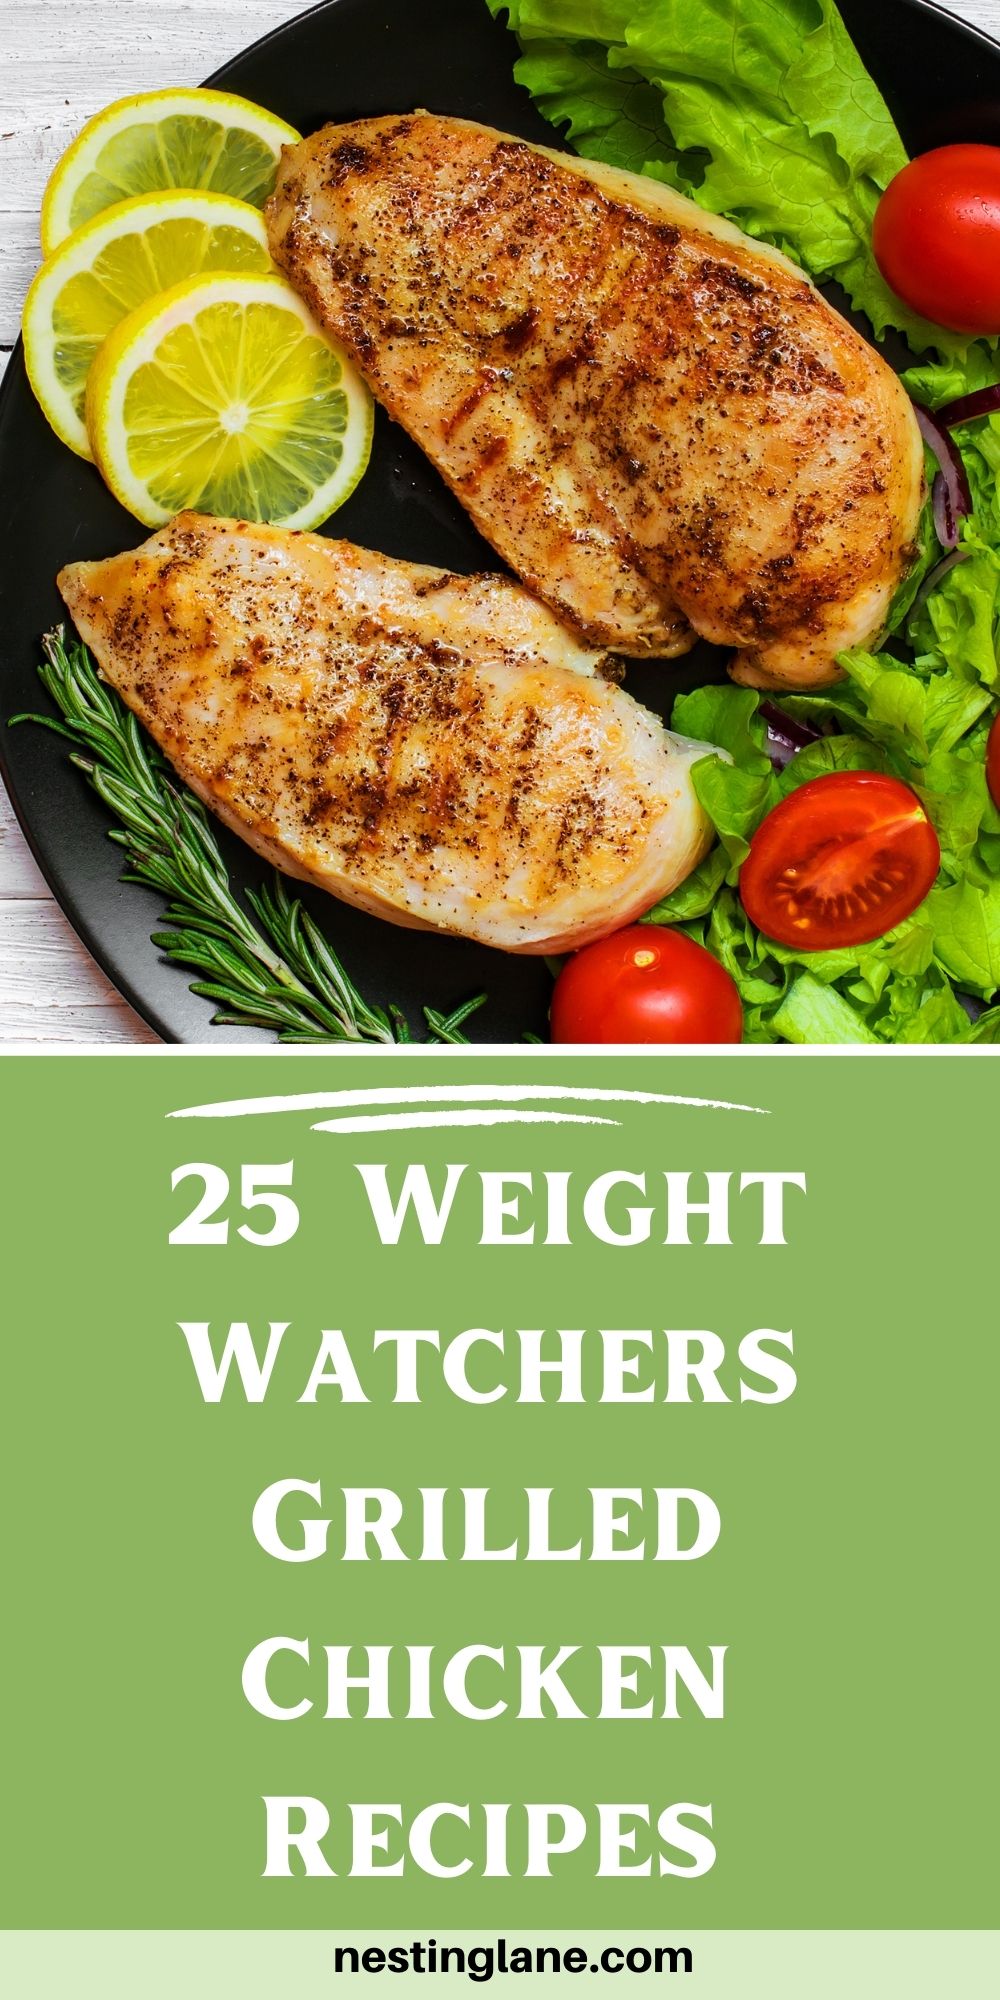 Graphic for Pinterest of 25 Weight Watchers Grilled Chicken Recipes.